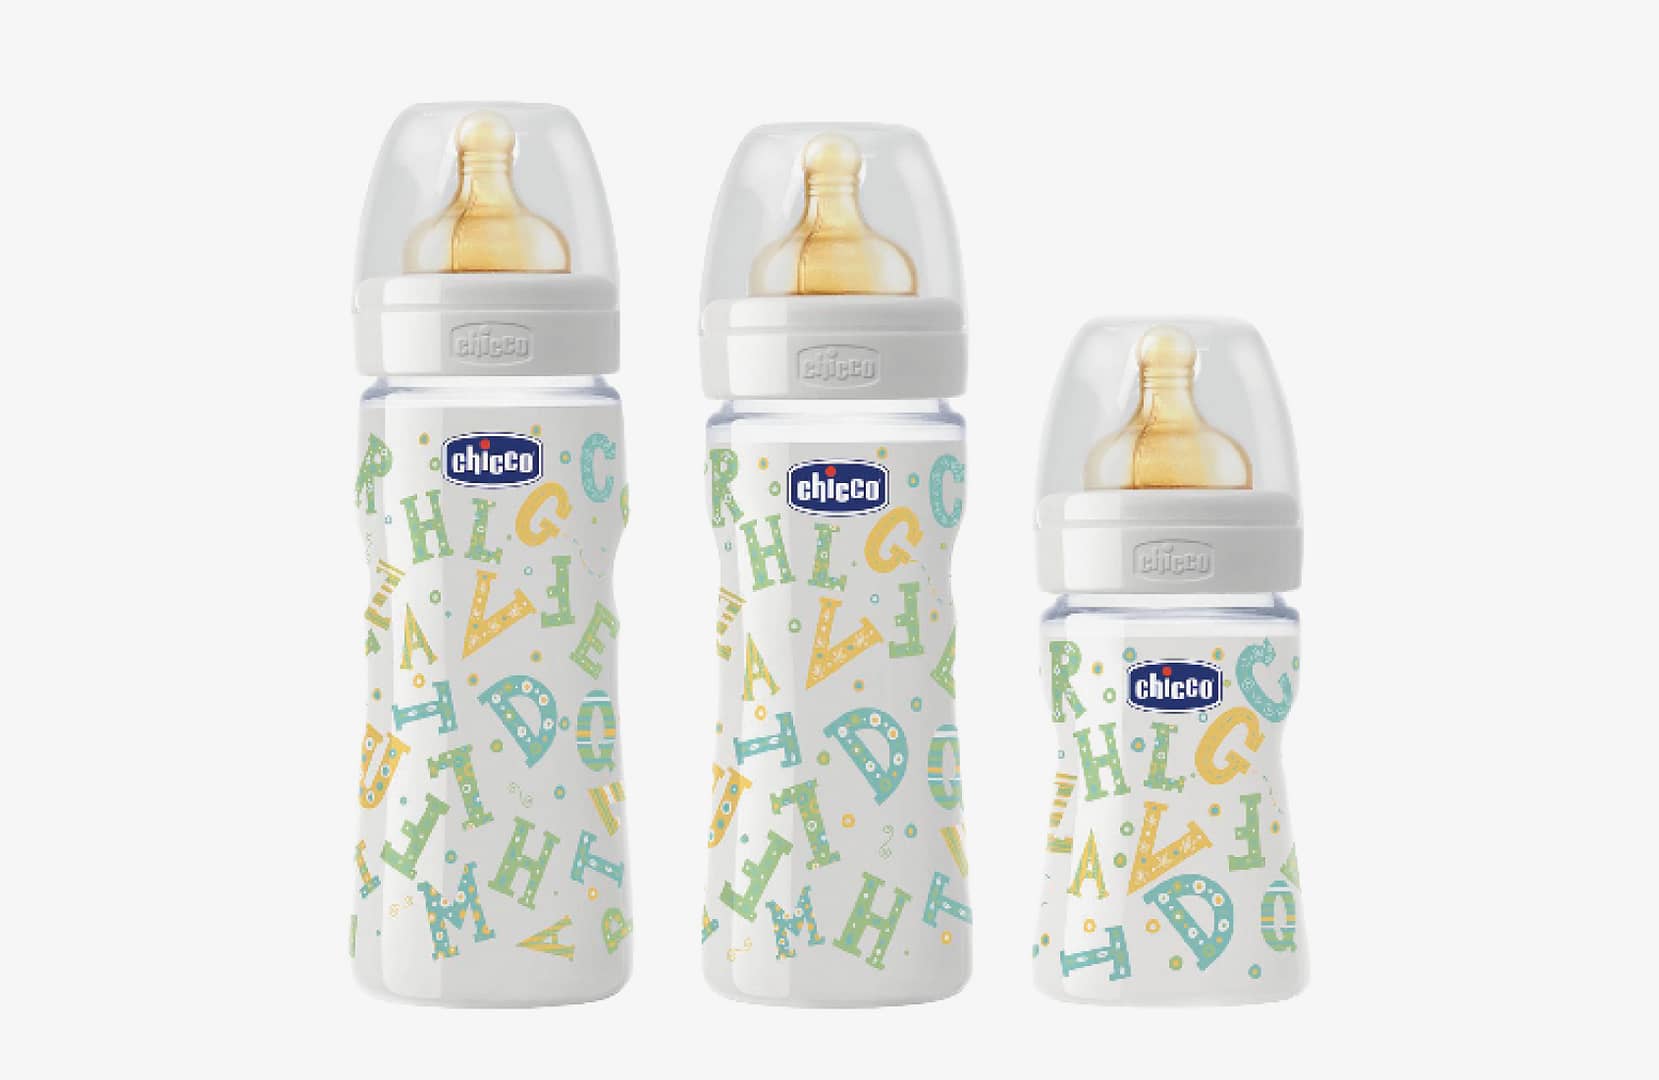 New color distribution for existing illustration and its application to baby bottles by Chicco.